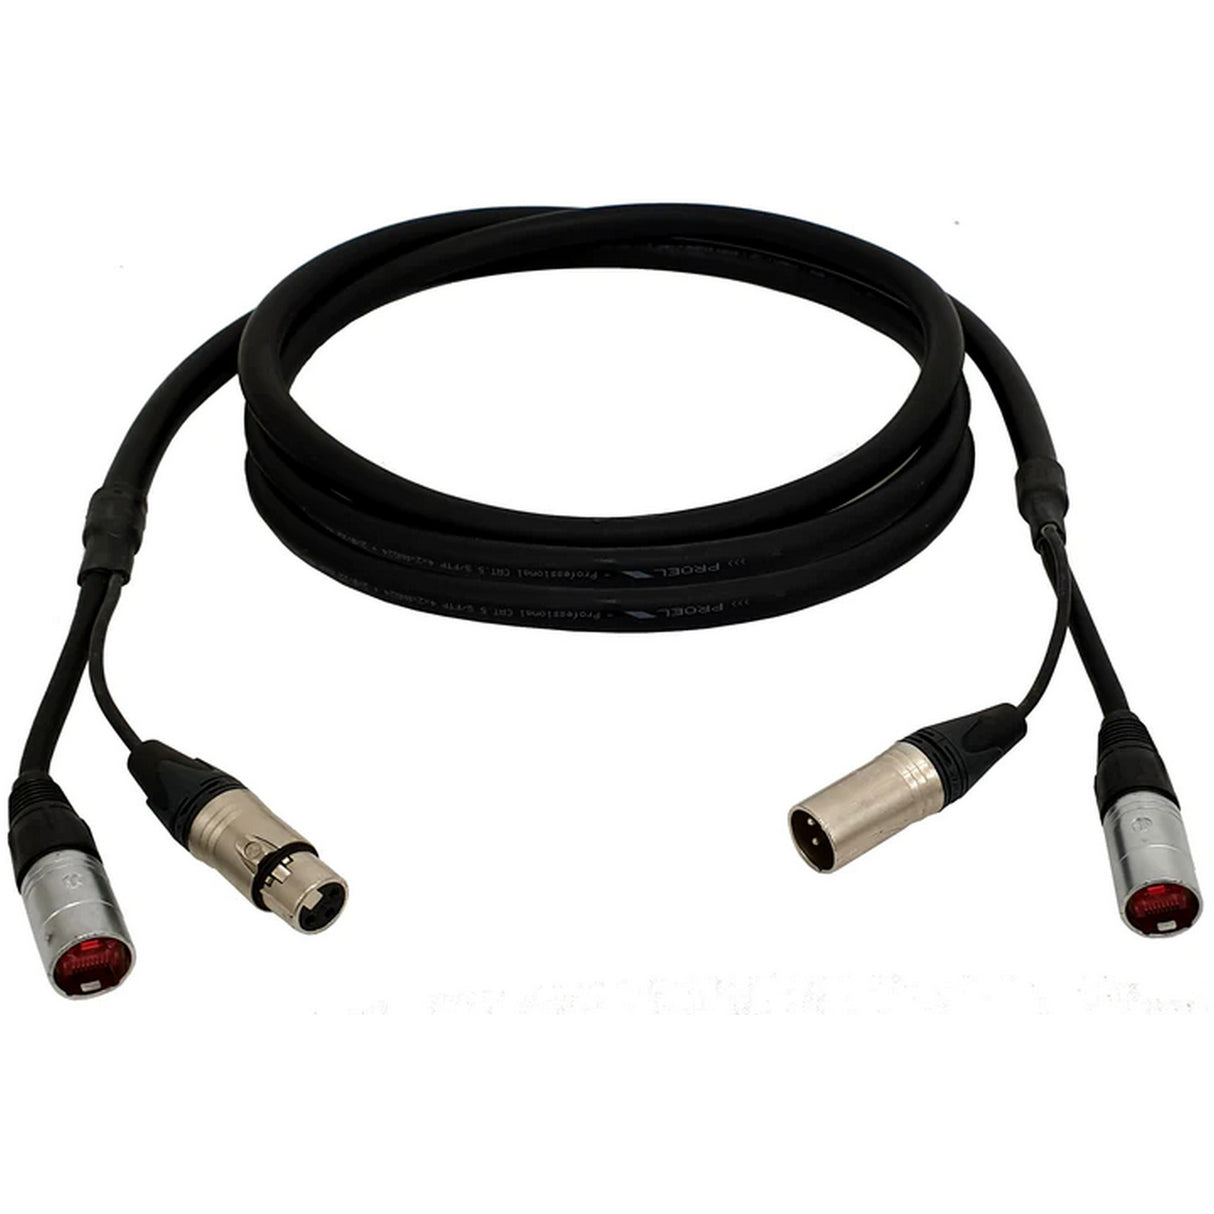 Axiom AR100LU05 Audio and Remote Cable for Linking Adjacent Speaker Stacks, 16-Feet